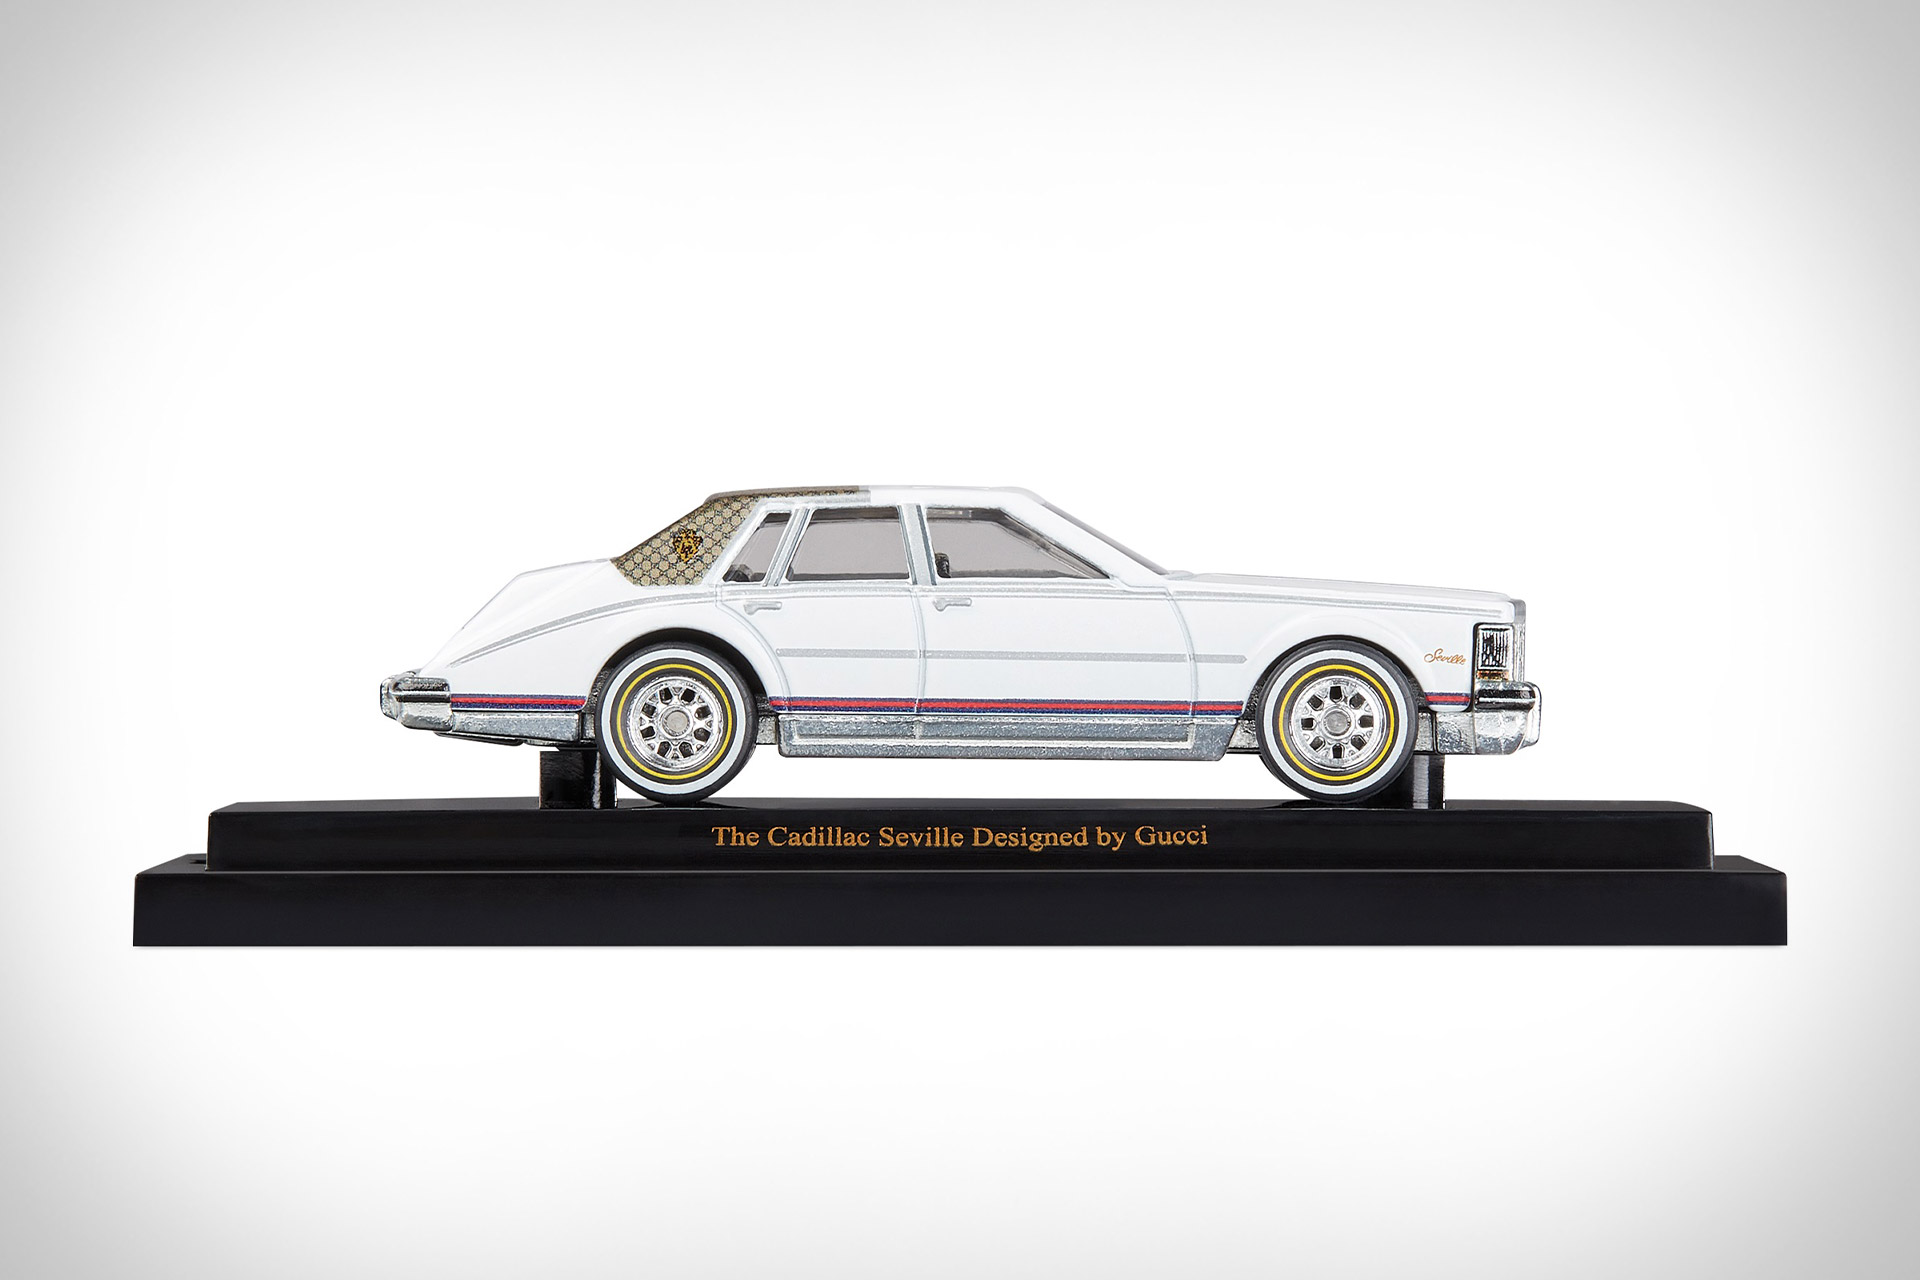 Hot Wheels x Gucci Cadillac Seville Toy Car | Uncrate